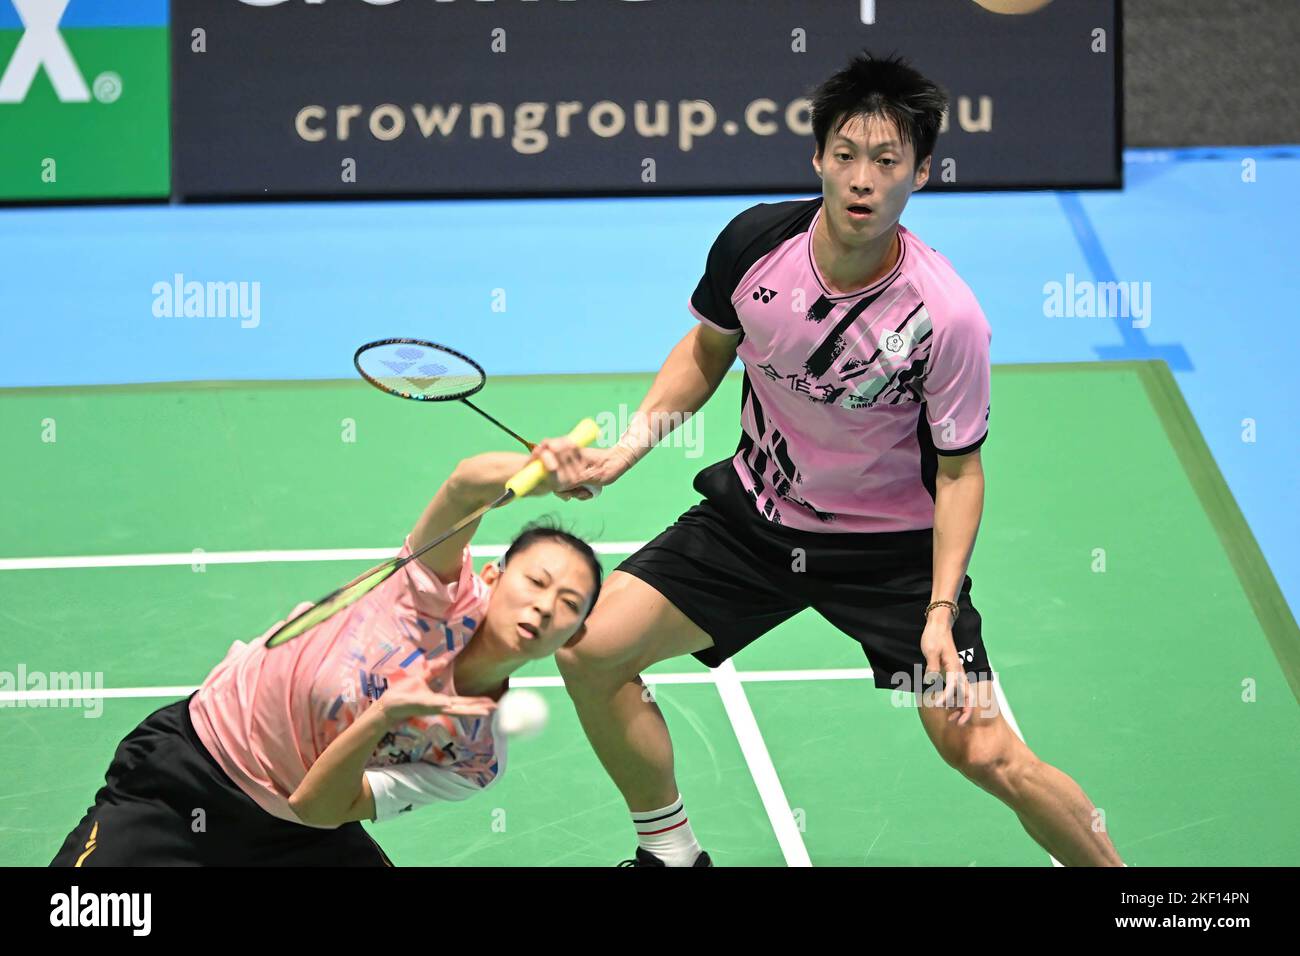 Sydney, Australia. 15th Nov, 2022. Yang Po-Hsuan (back) and Hu Ling Fang (front) of Chinese Taipei seen in action during the 2022 SATHIO GROUP Australian Badminton Open mixed doubles match against Kyohei Yamashita and Natsu Saito of Japan. Yang and Hu won the match, 17-21, 21-19, 21-12. Credit: SOPA Images Limited/Alamy Live News Stock Photo